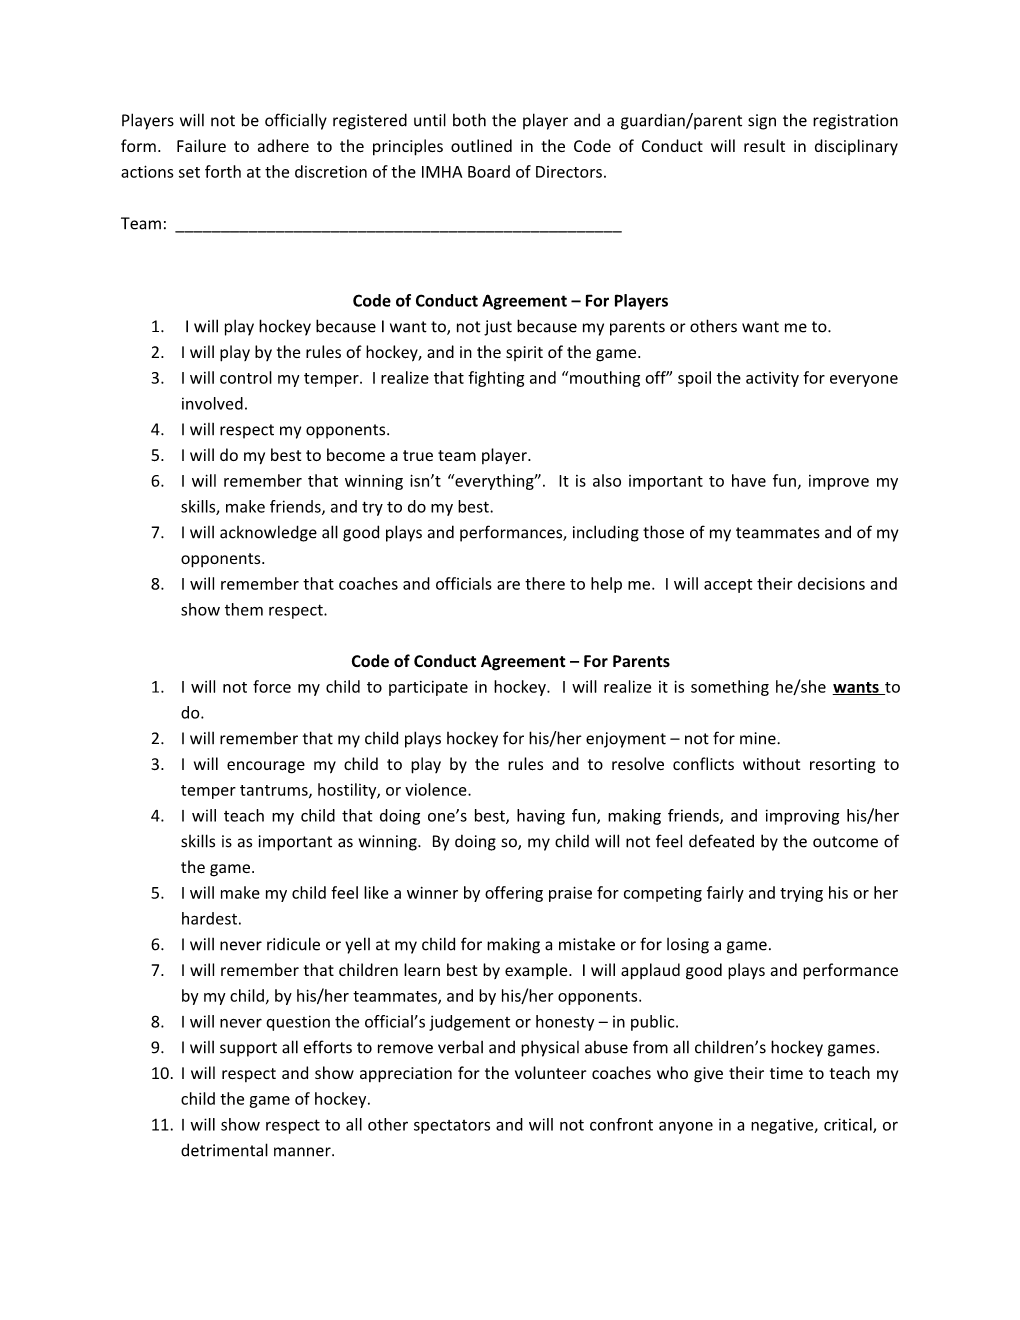 Code of Conduct Agreement for Players